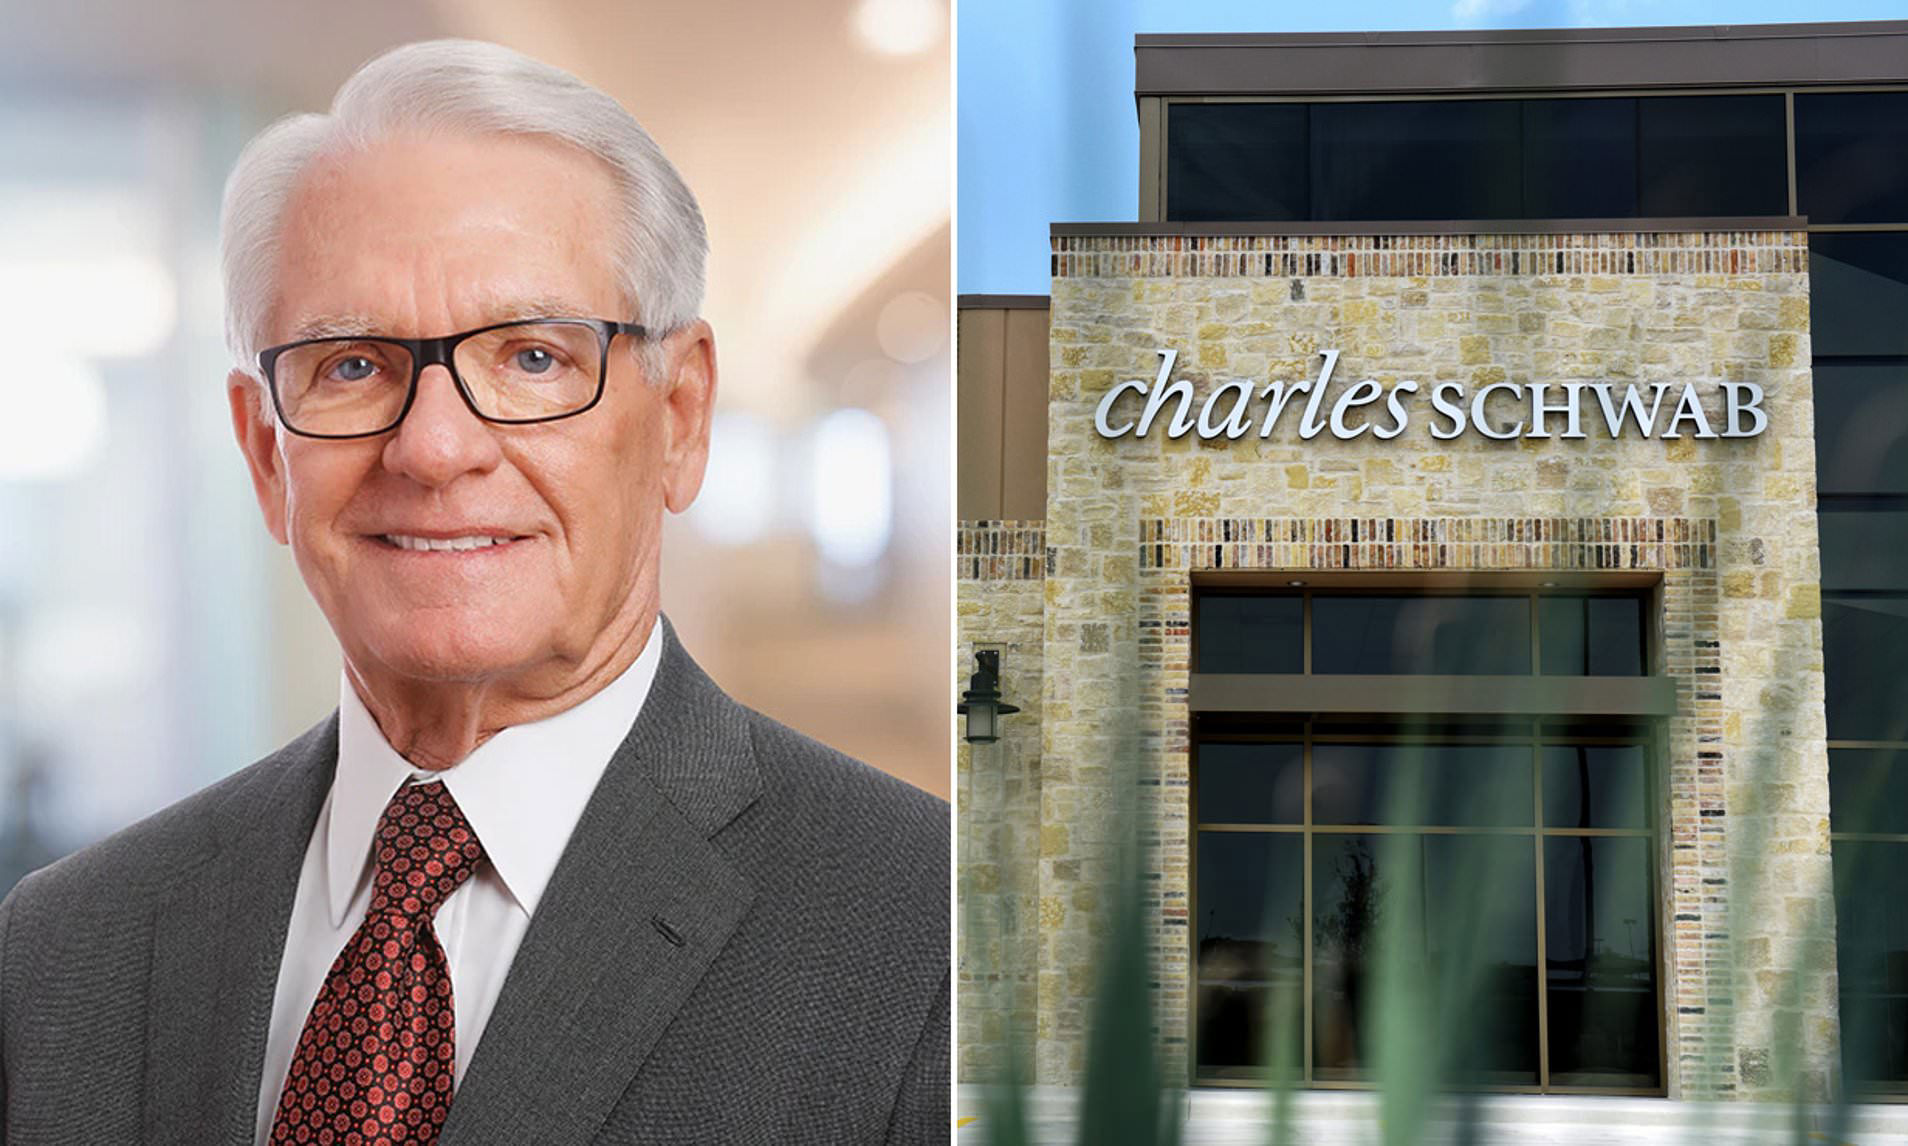 Charles Schwab plans to cut jobs and close offices to save 500 million